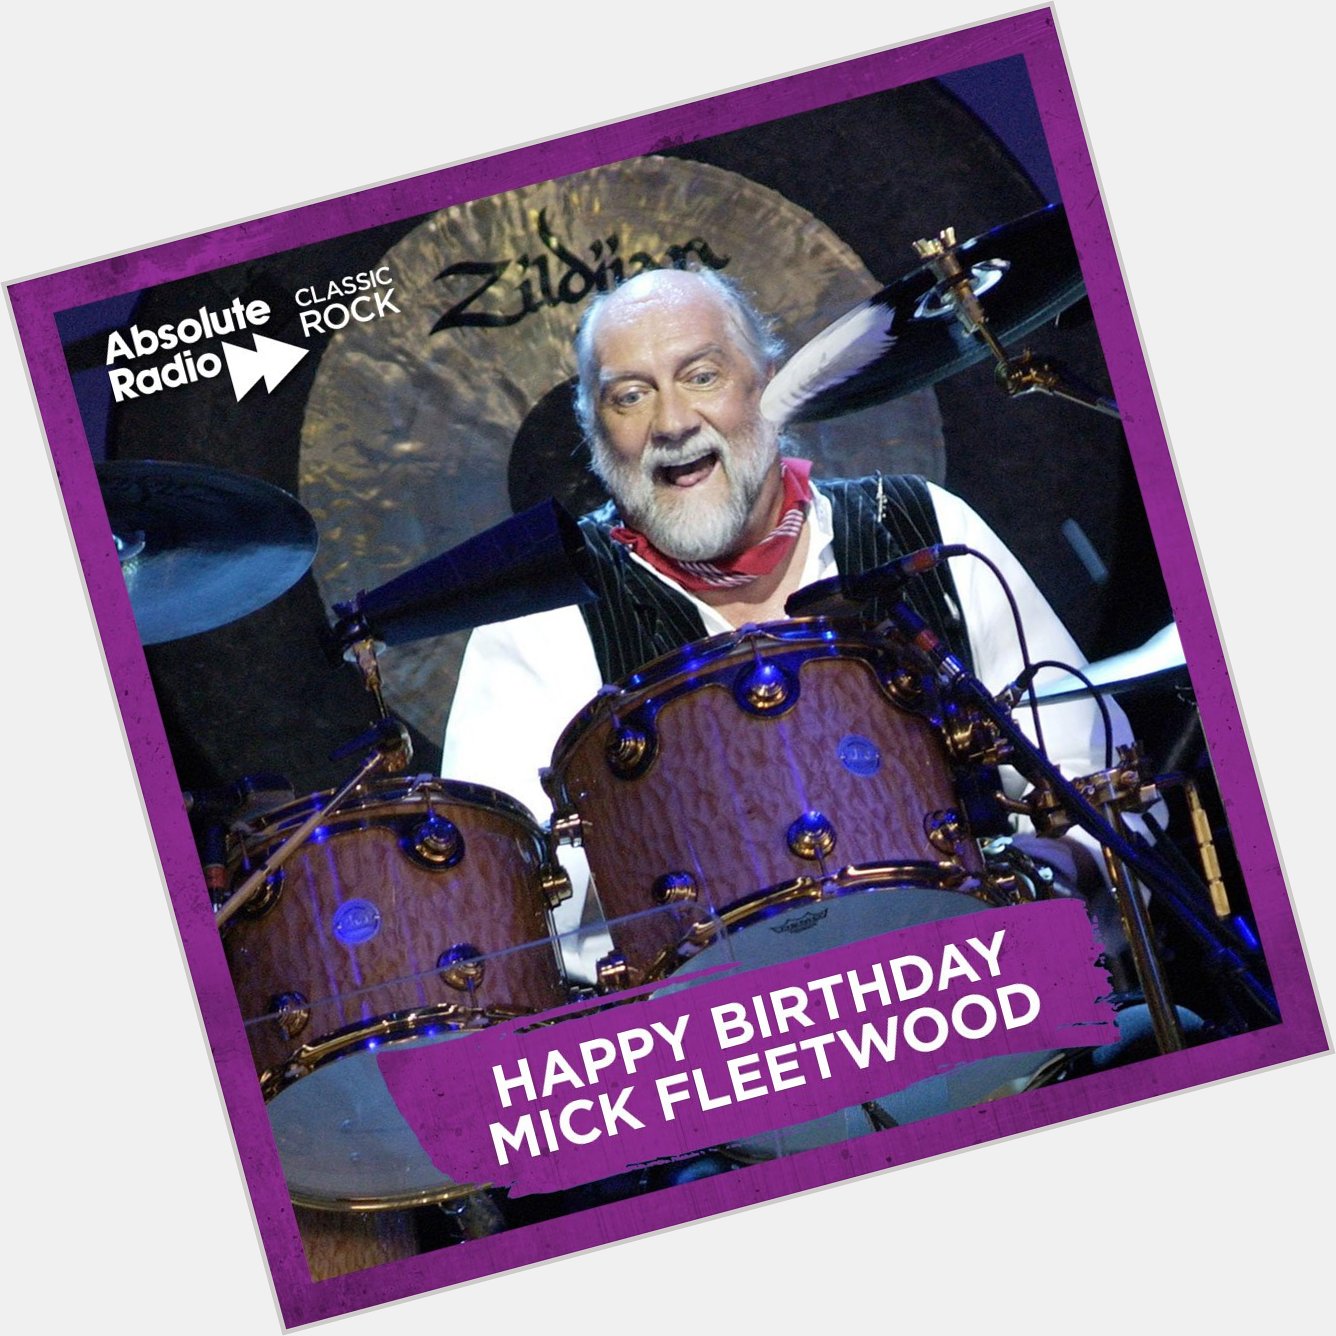 And a happy 72nd birthday to Mick Fleetwood! 